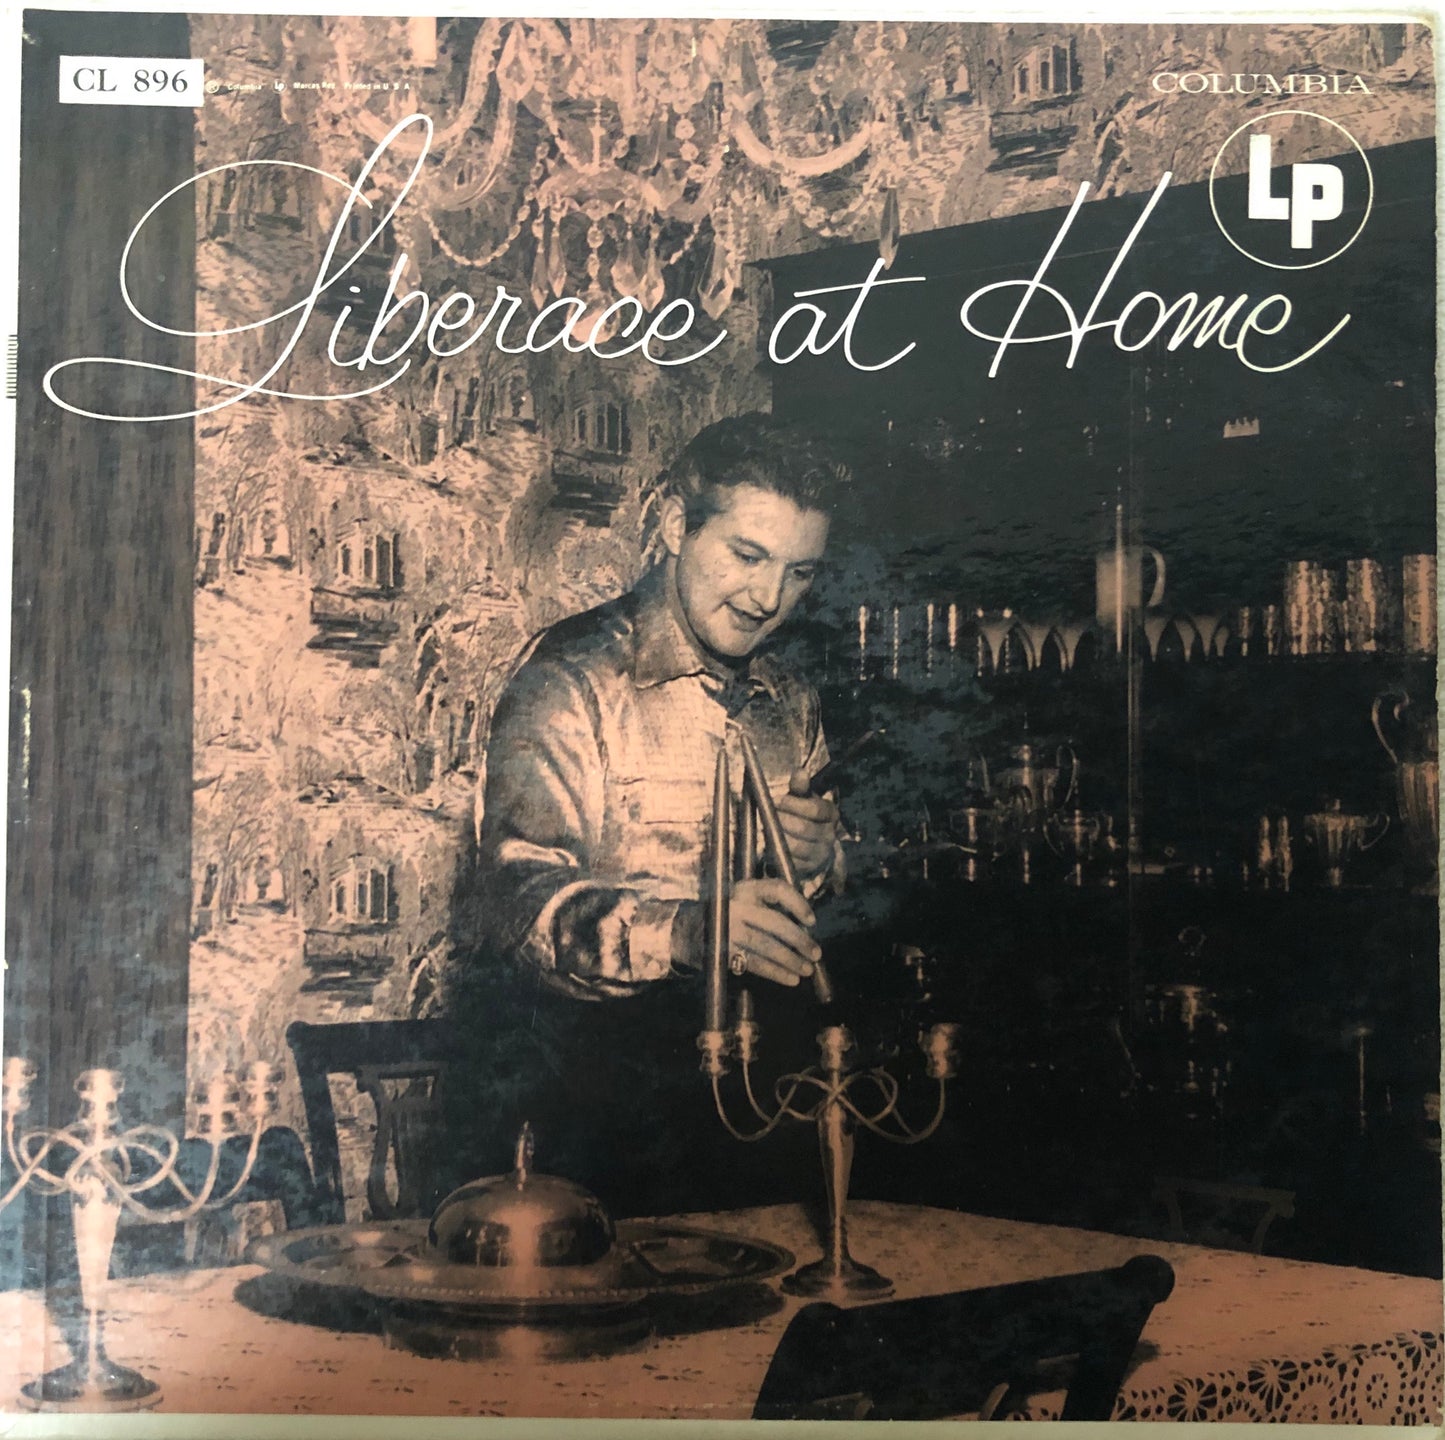 Liberace at Home